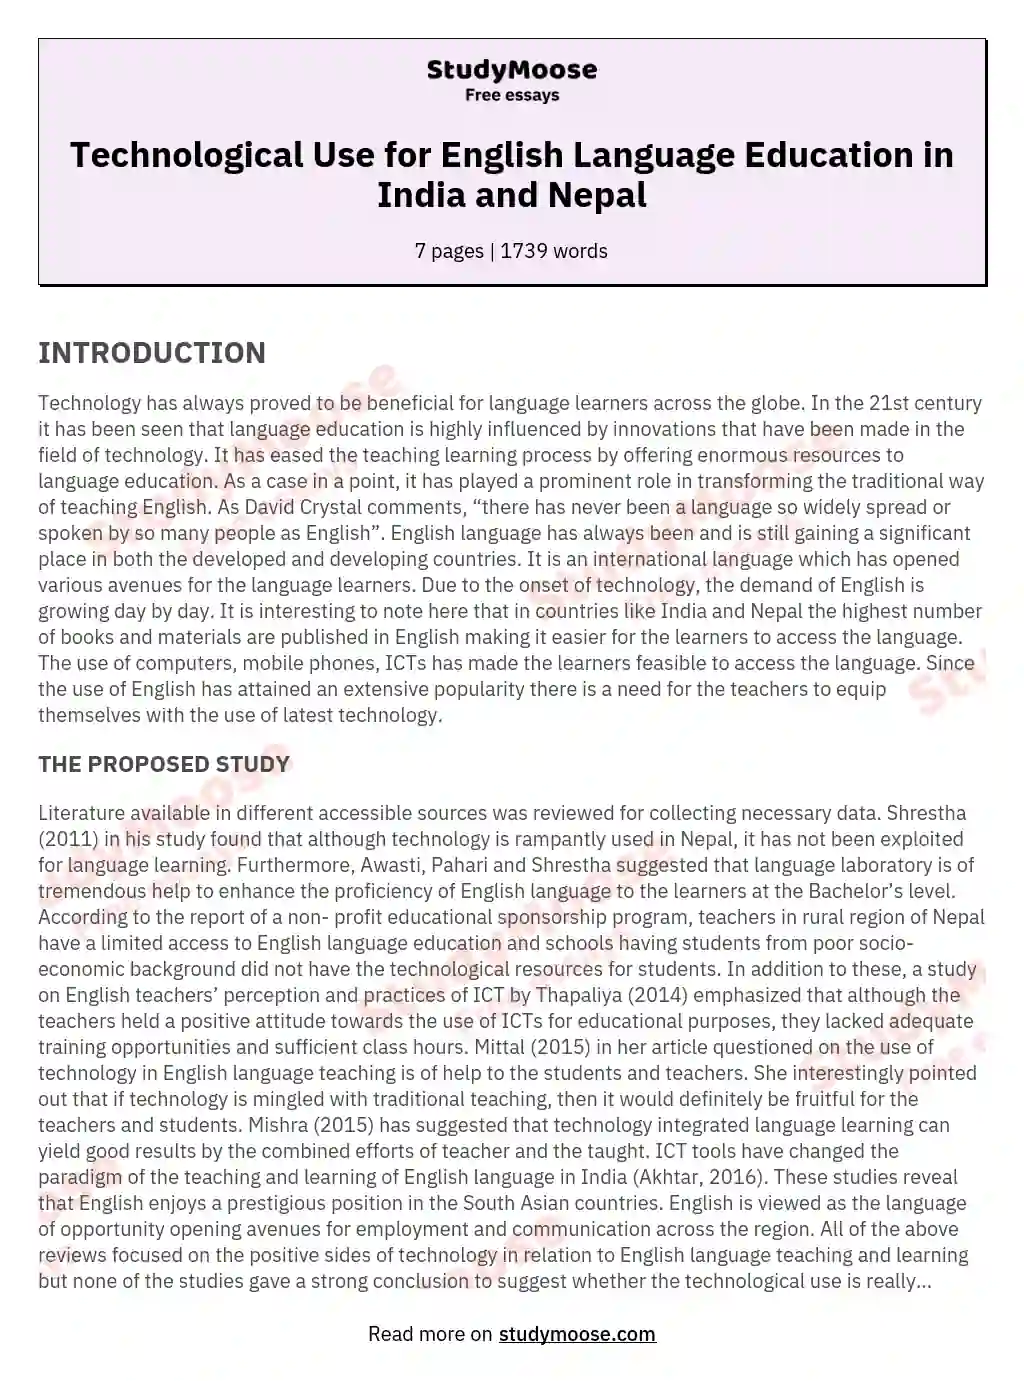 Technological Use for English Language Education in India and Nepal essay